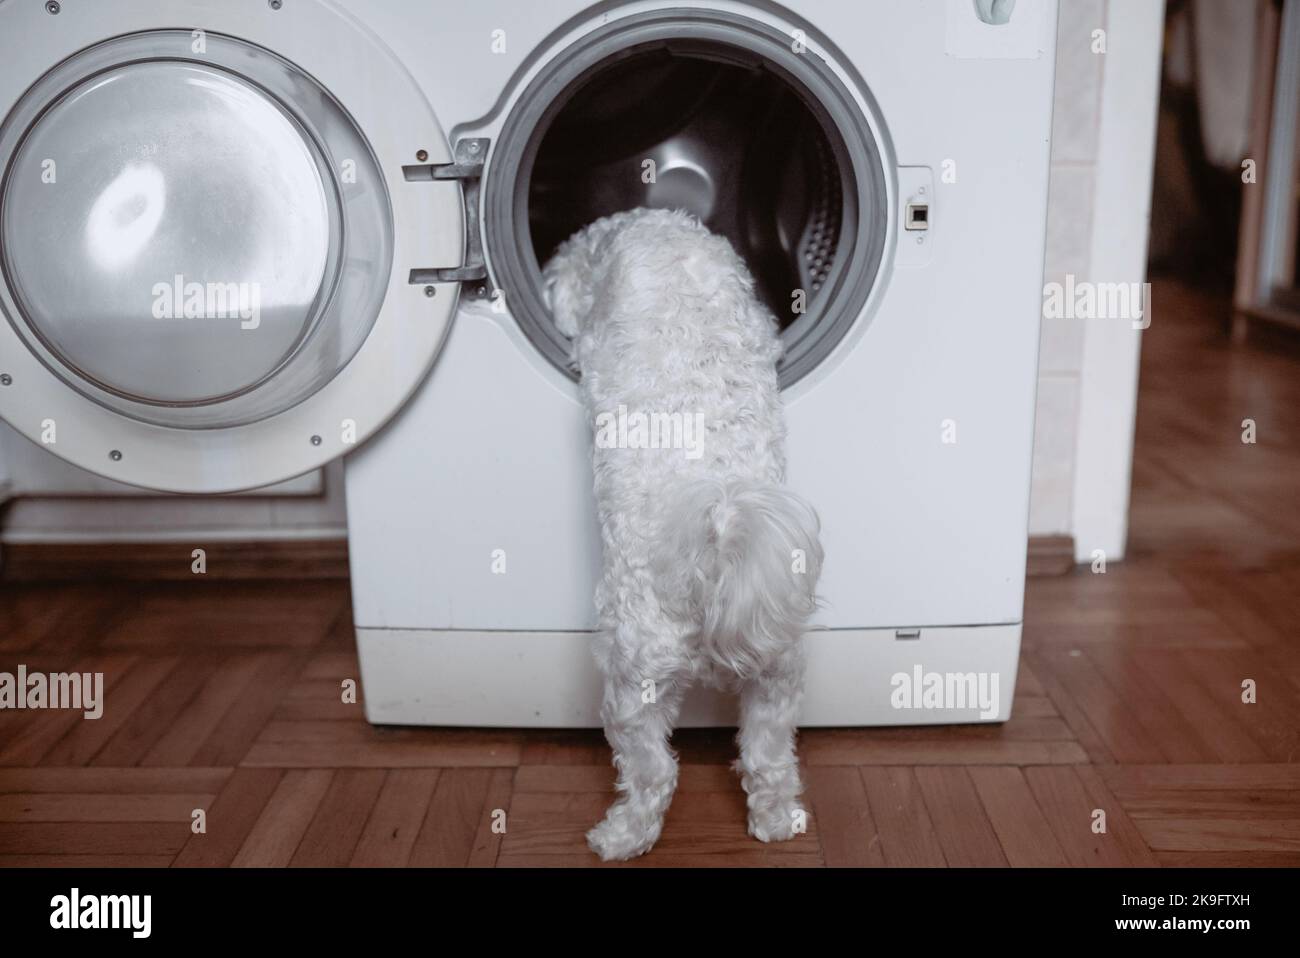 Cute little white dog looking in to washing machine. Stock Photo